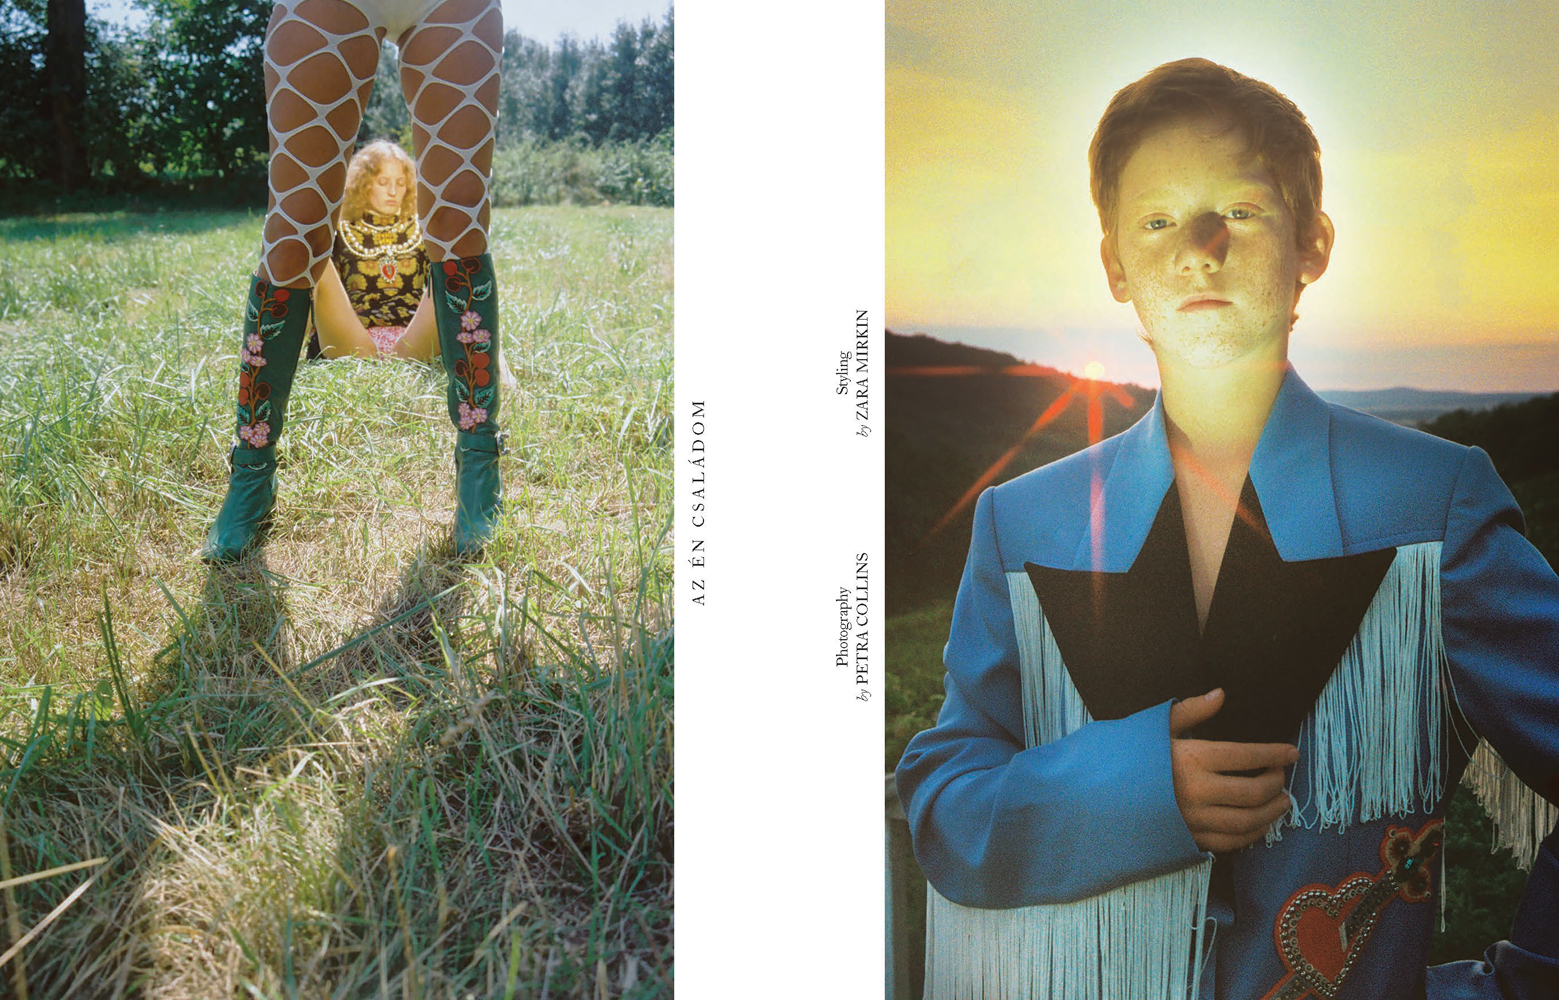 Dan Thawley | A Magazine Curated by Alessandro Michele | 107